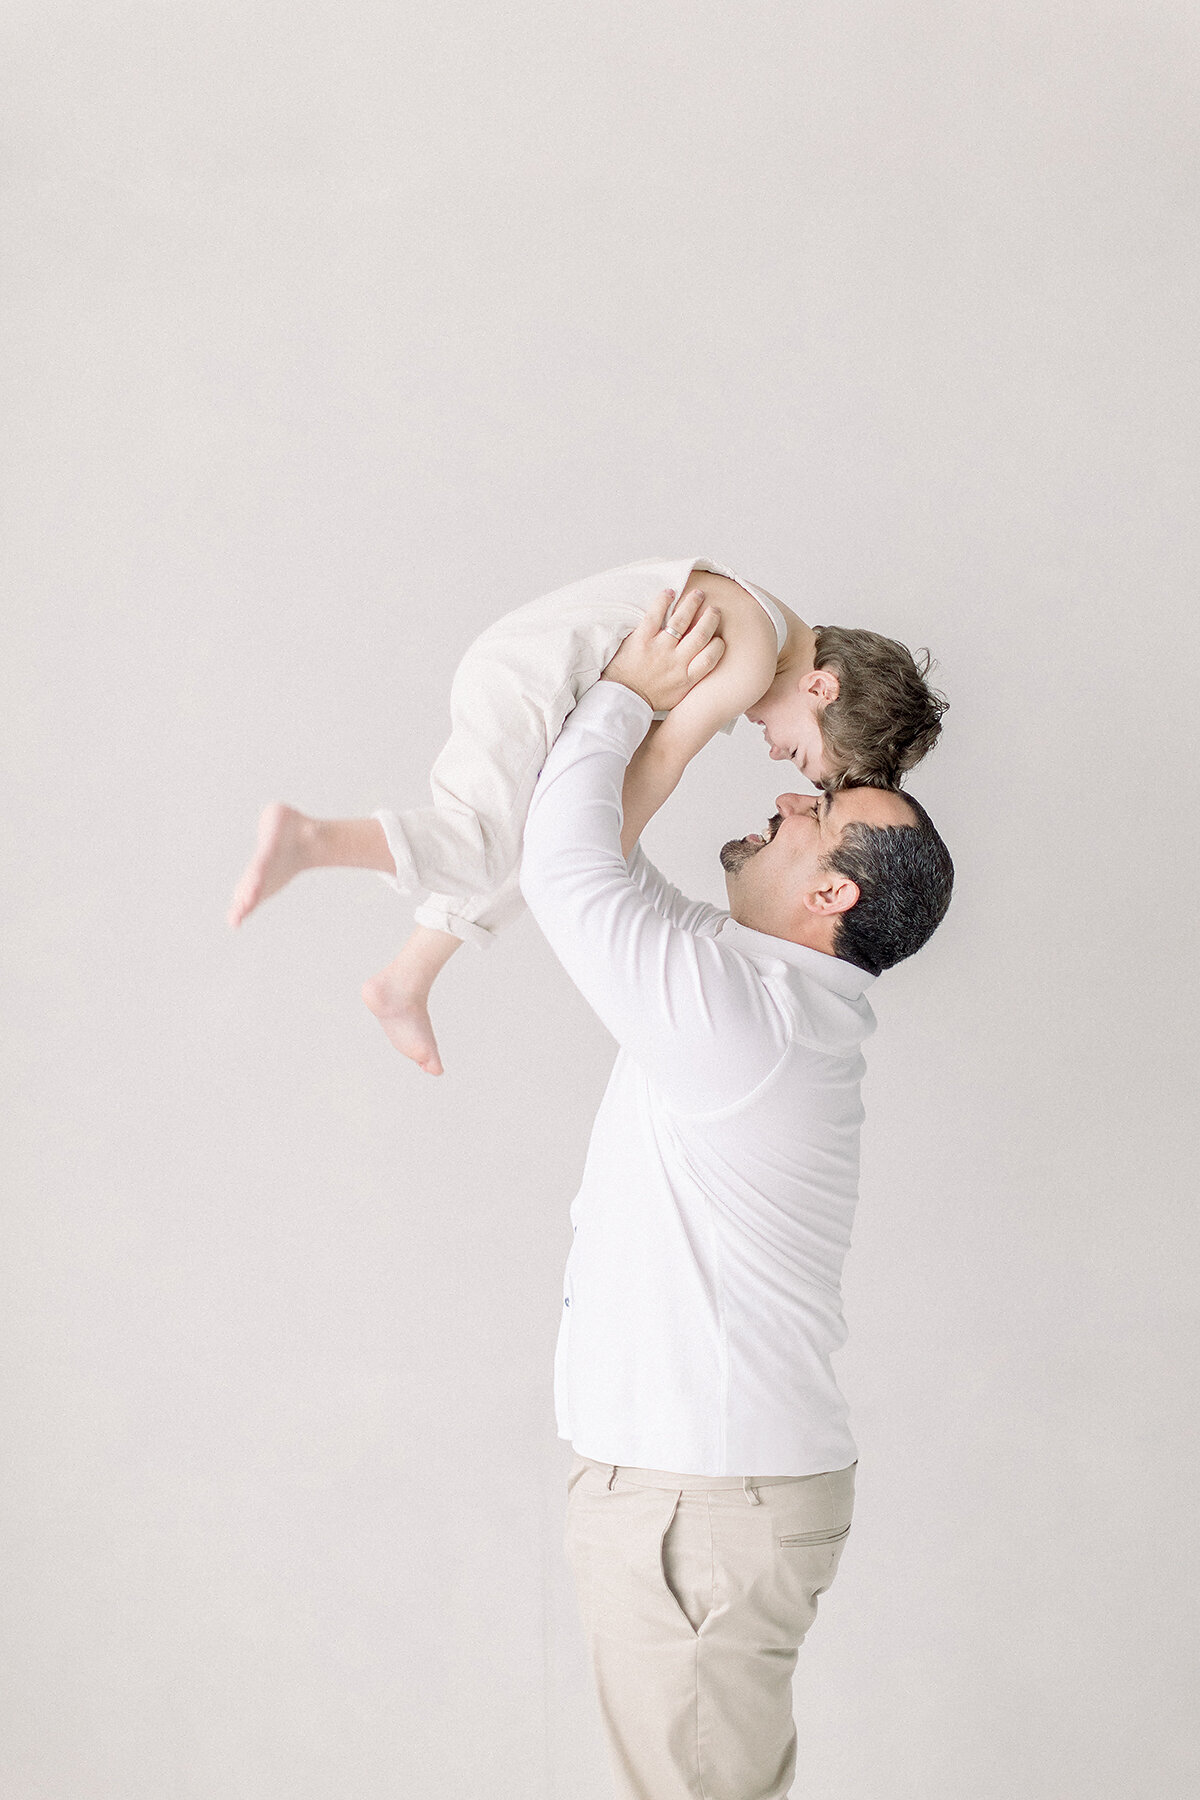 A photo of a dad holding up his young son up in the air as they play around in a Dallas photography studio for their family portraits together.